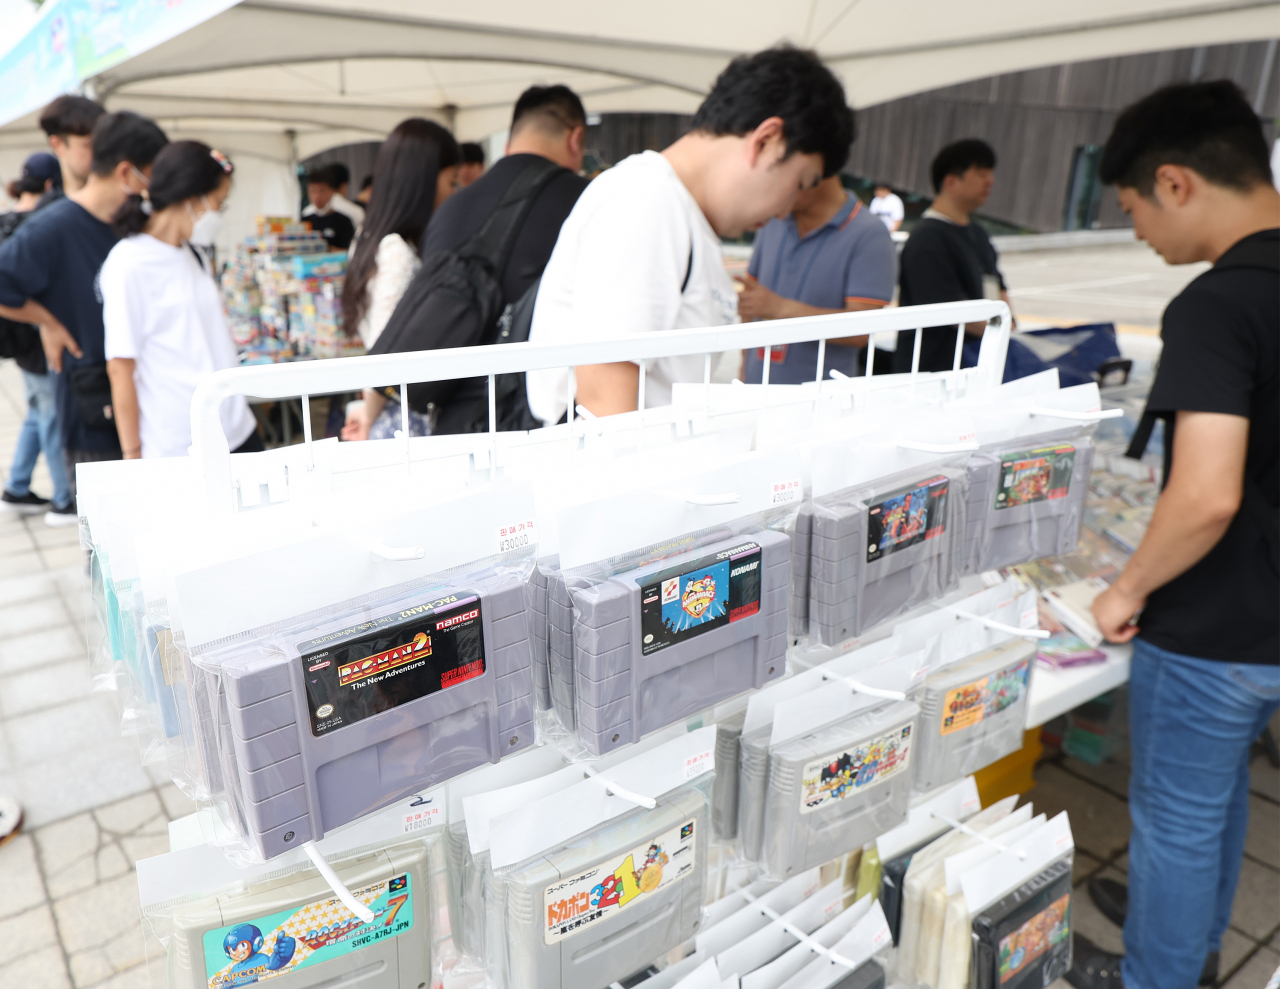 Participants of the 88 Green Festival, held in commemoration of the 1988 Summer Olympics in Seoul, look at retro video game cartridges at Olympic Park in Songpa-gu, southern Seoul, Sept. 17. (Yonhap)